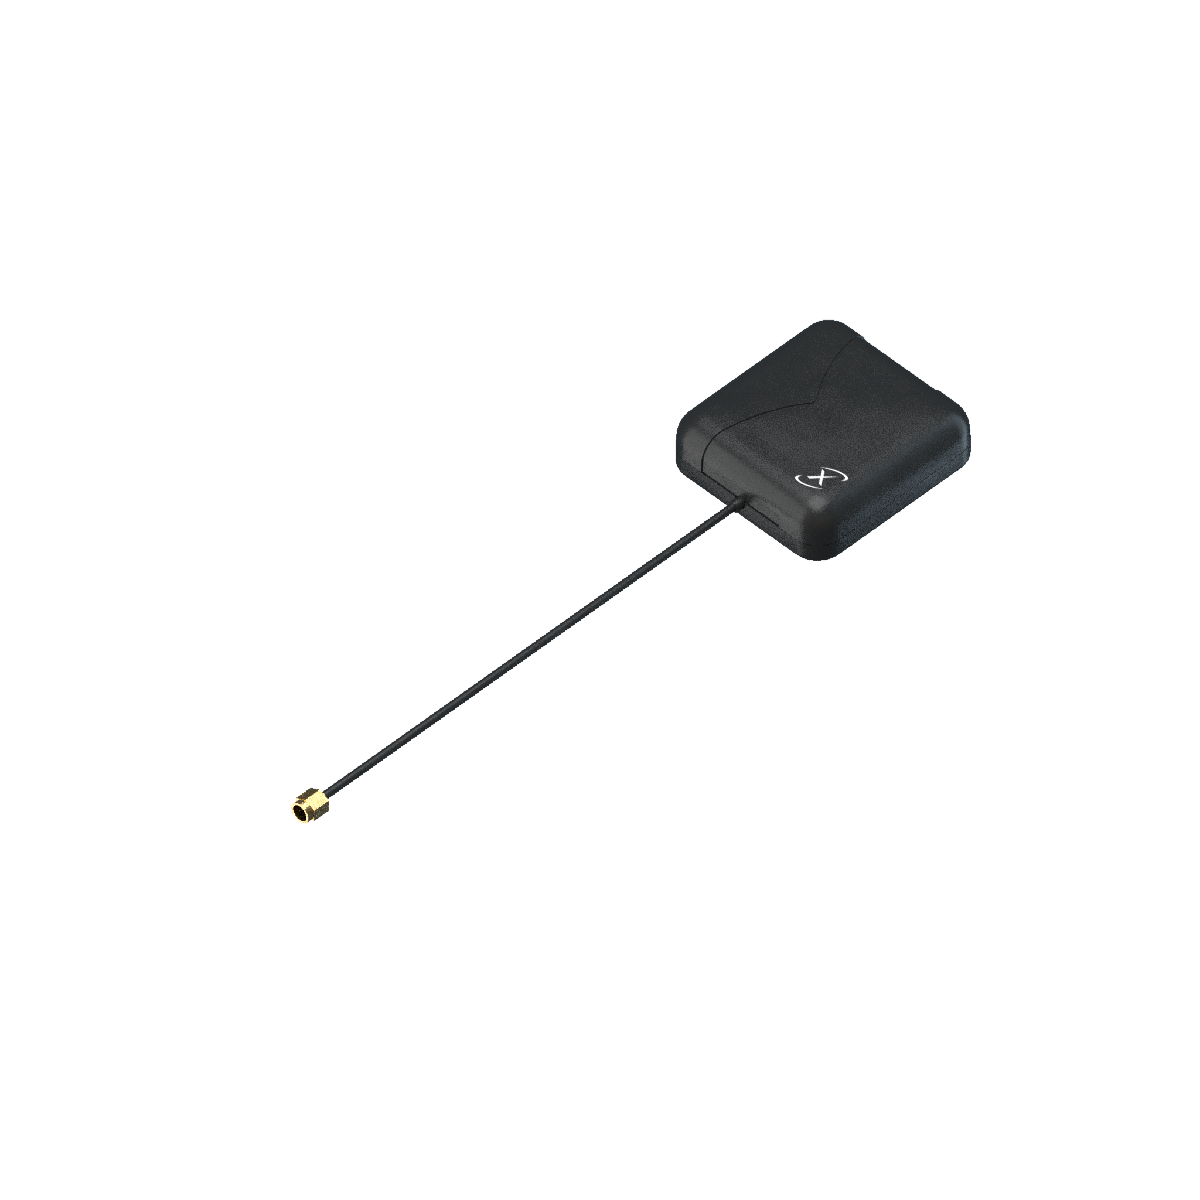 Active Multi-Frequency patch Antenna – External|L1: GPS, GLONASS ...